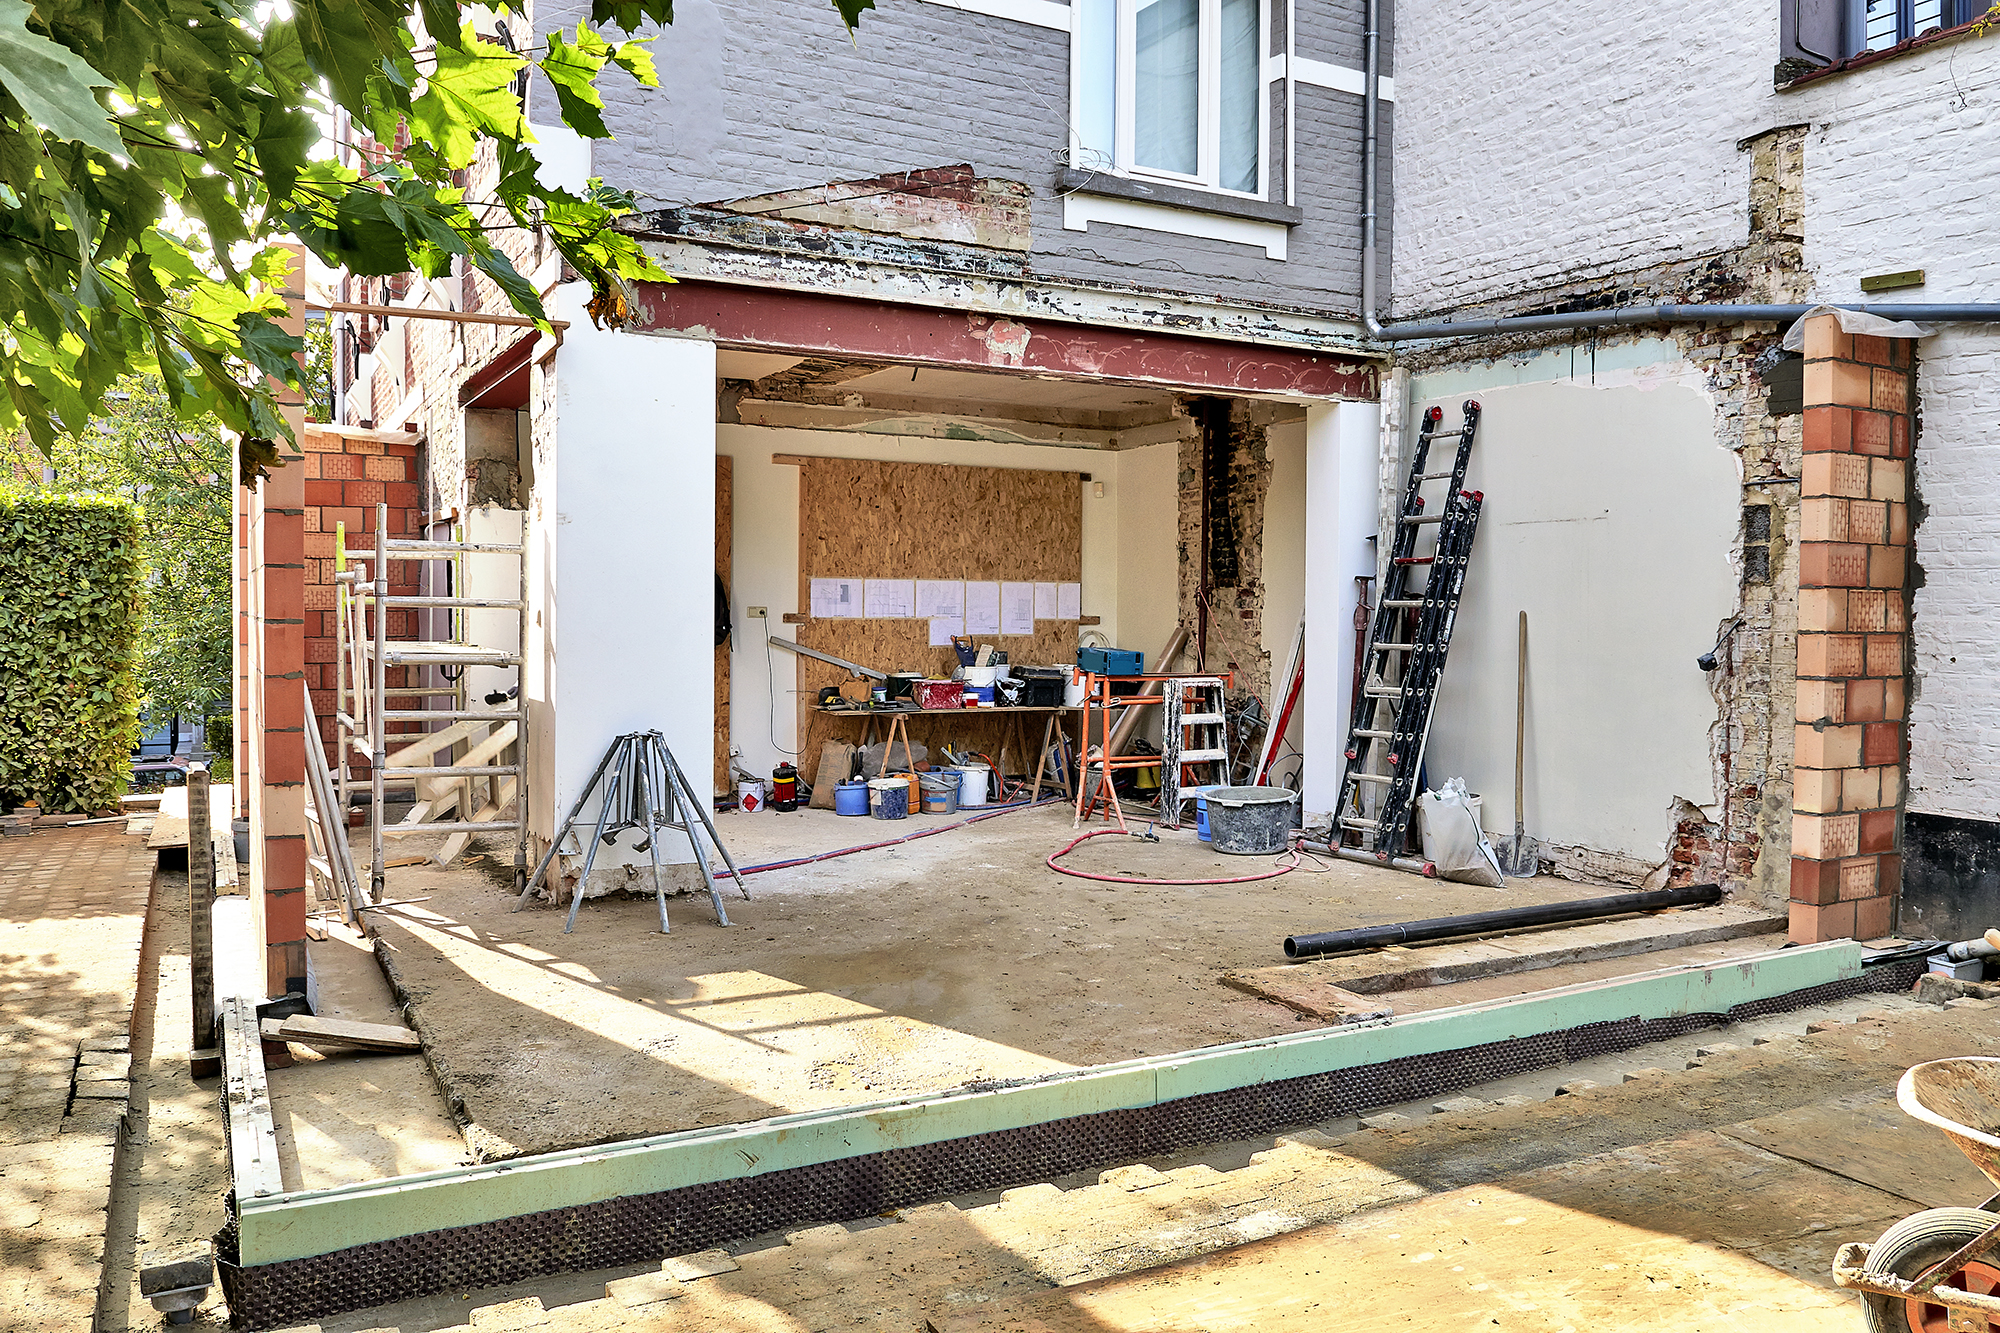 An extension for a house in progress. (Image: Shutterstock)